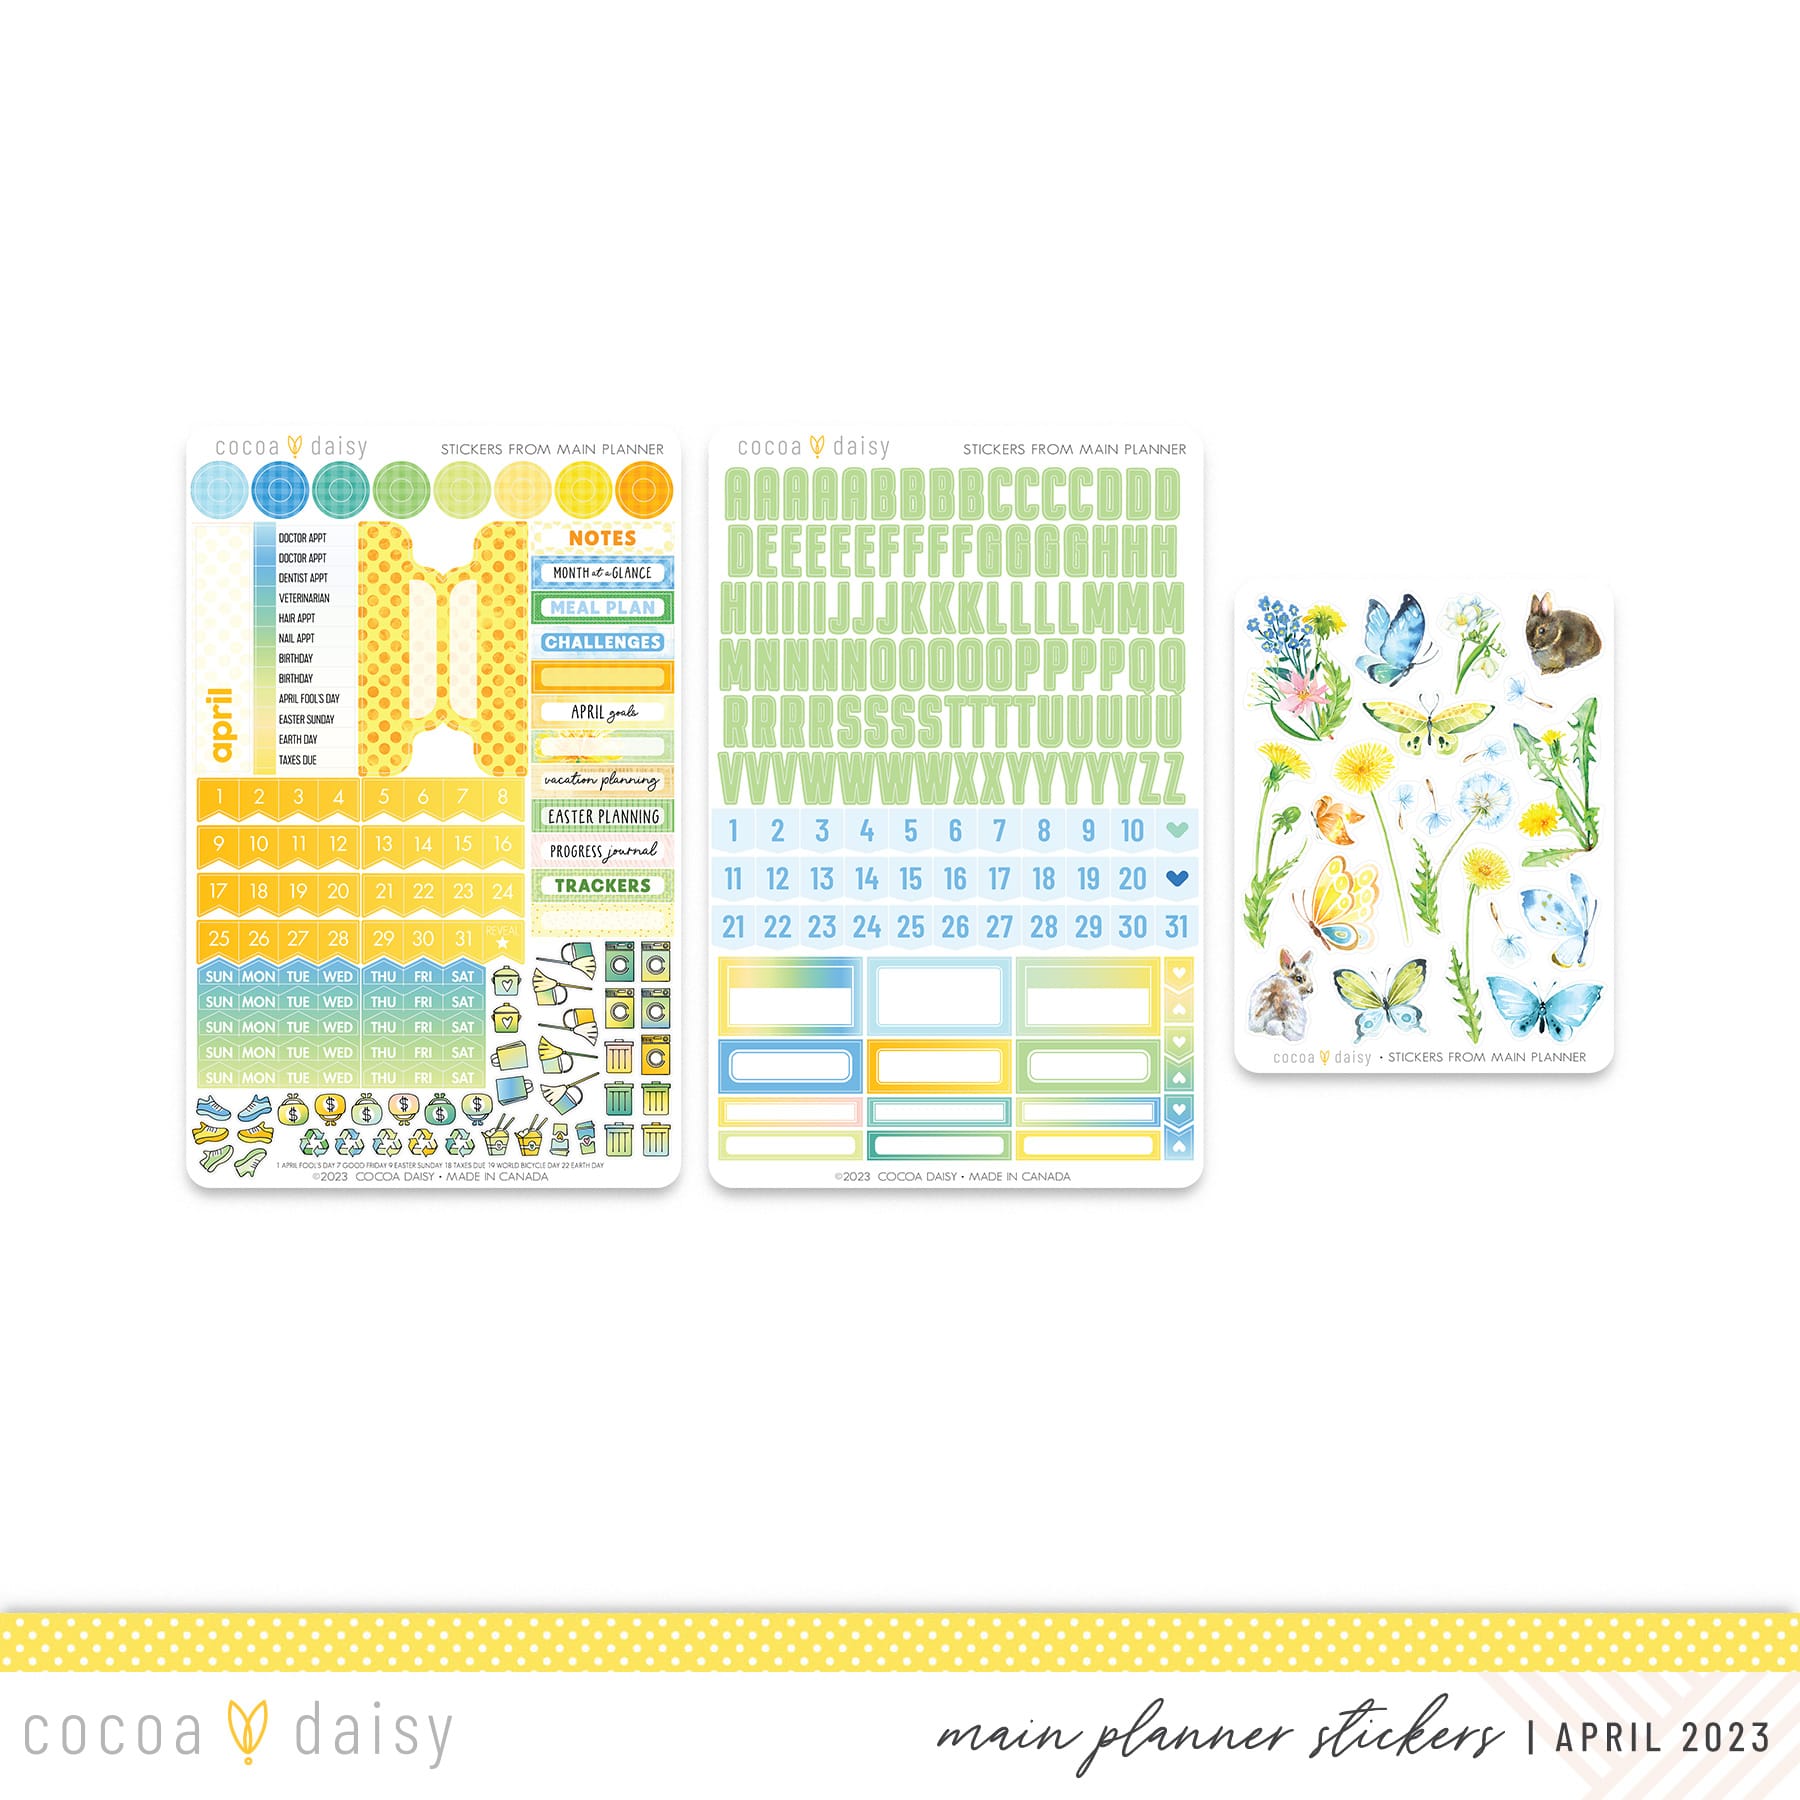 Dandelion Wishes Stickers from Main Planner April 2023